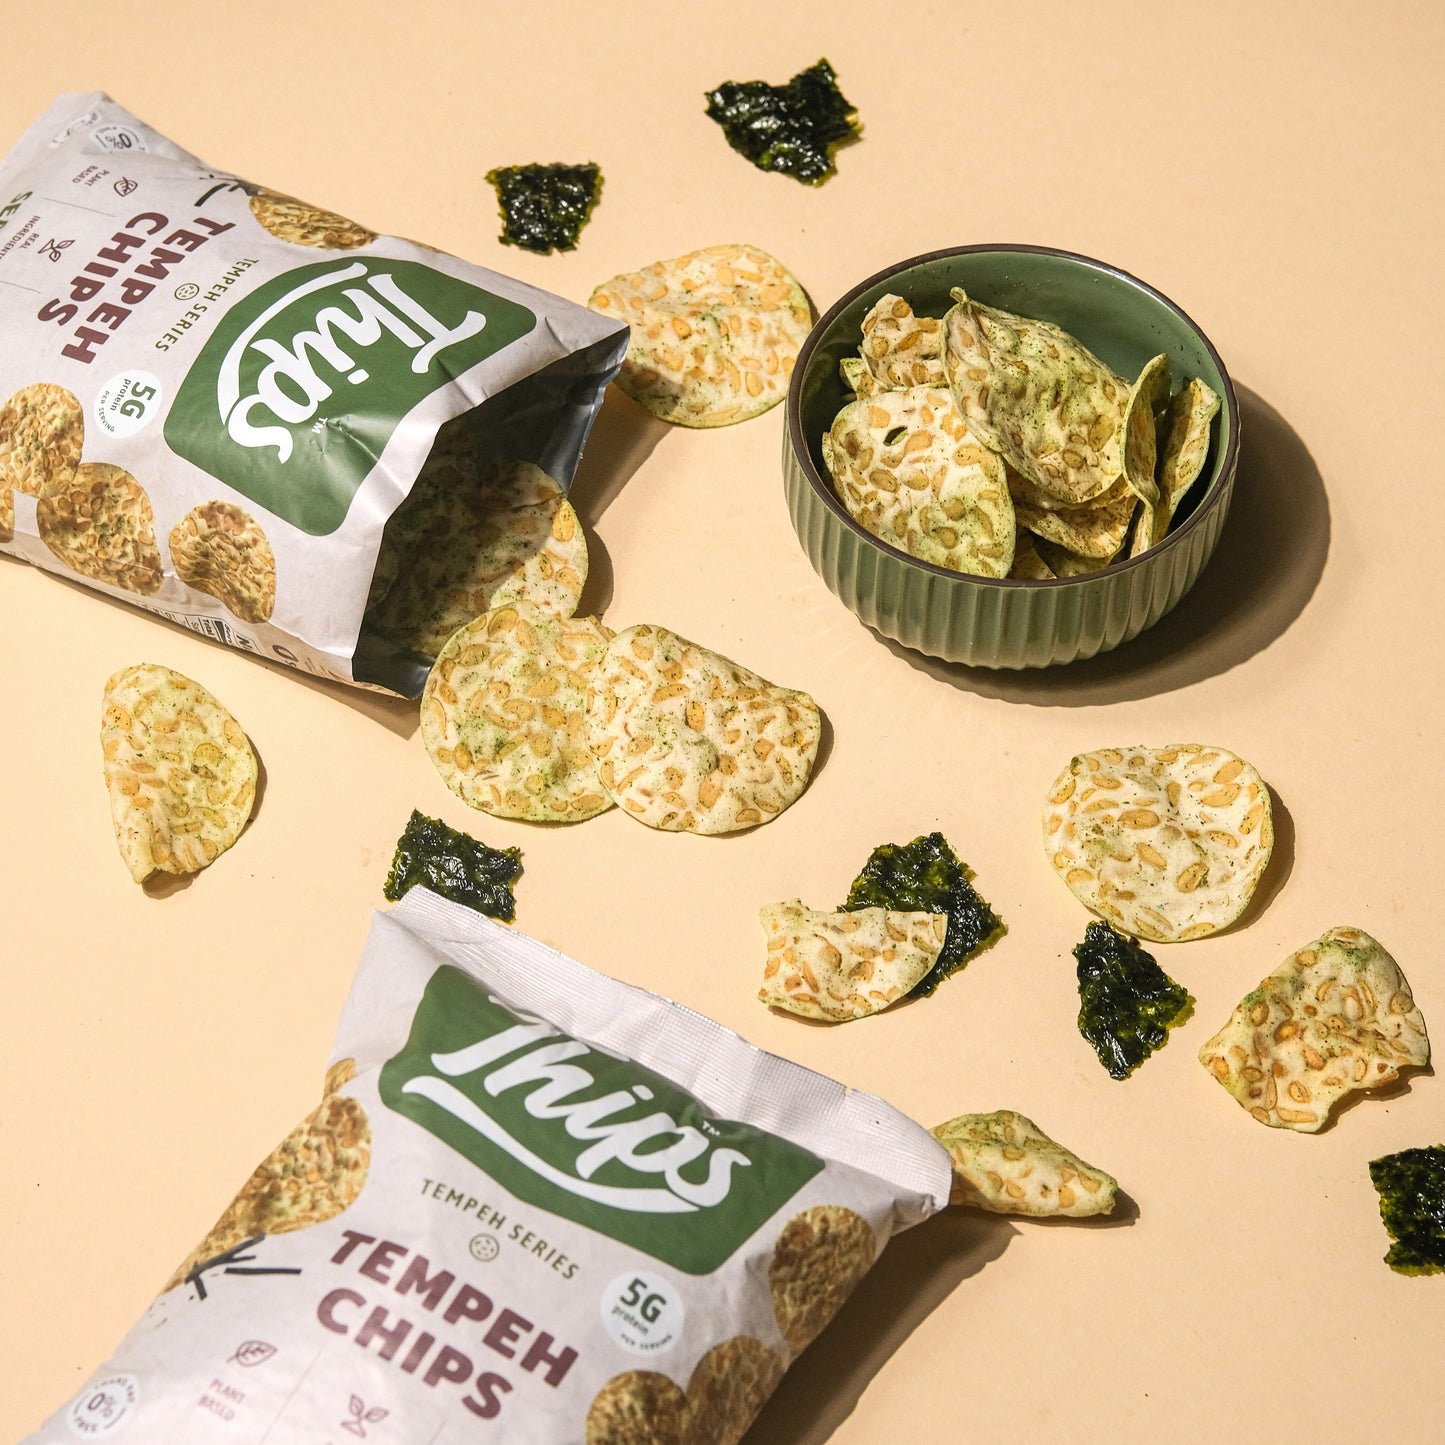 [Subscription Plan- Bundle of 24] Thips Seaweed Tempeh Chips